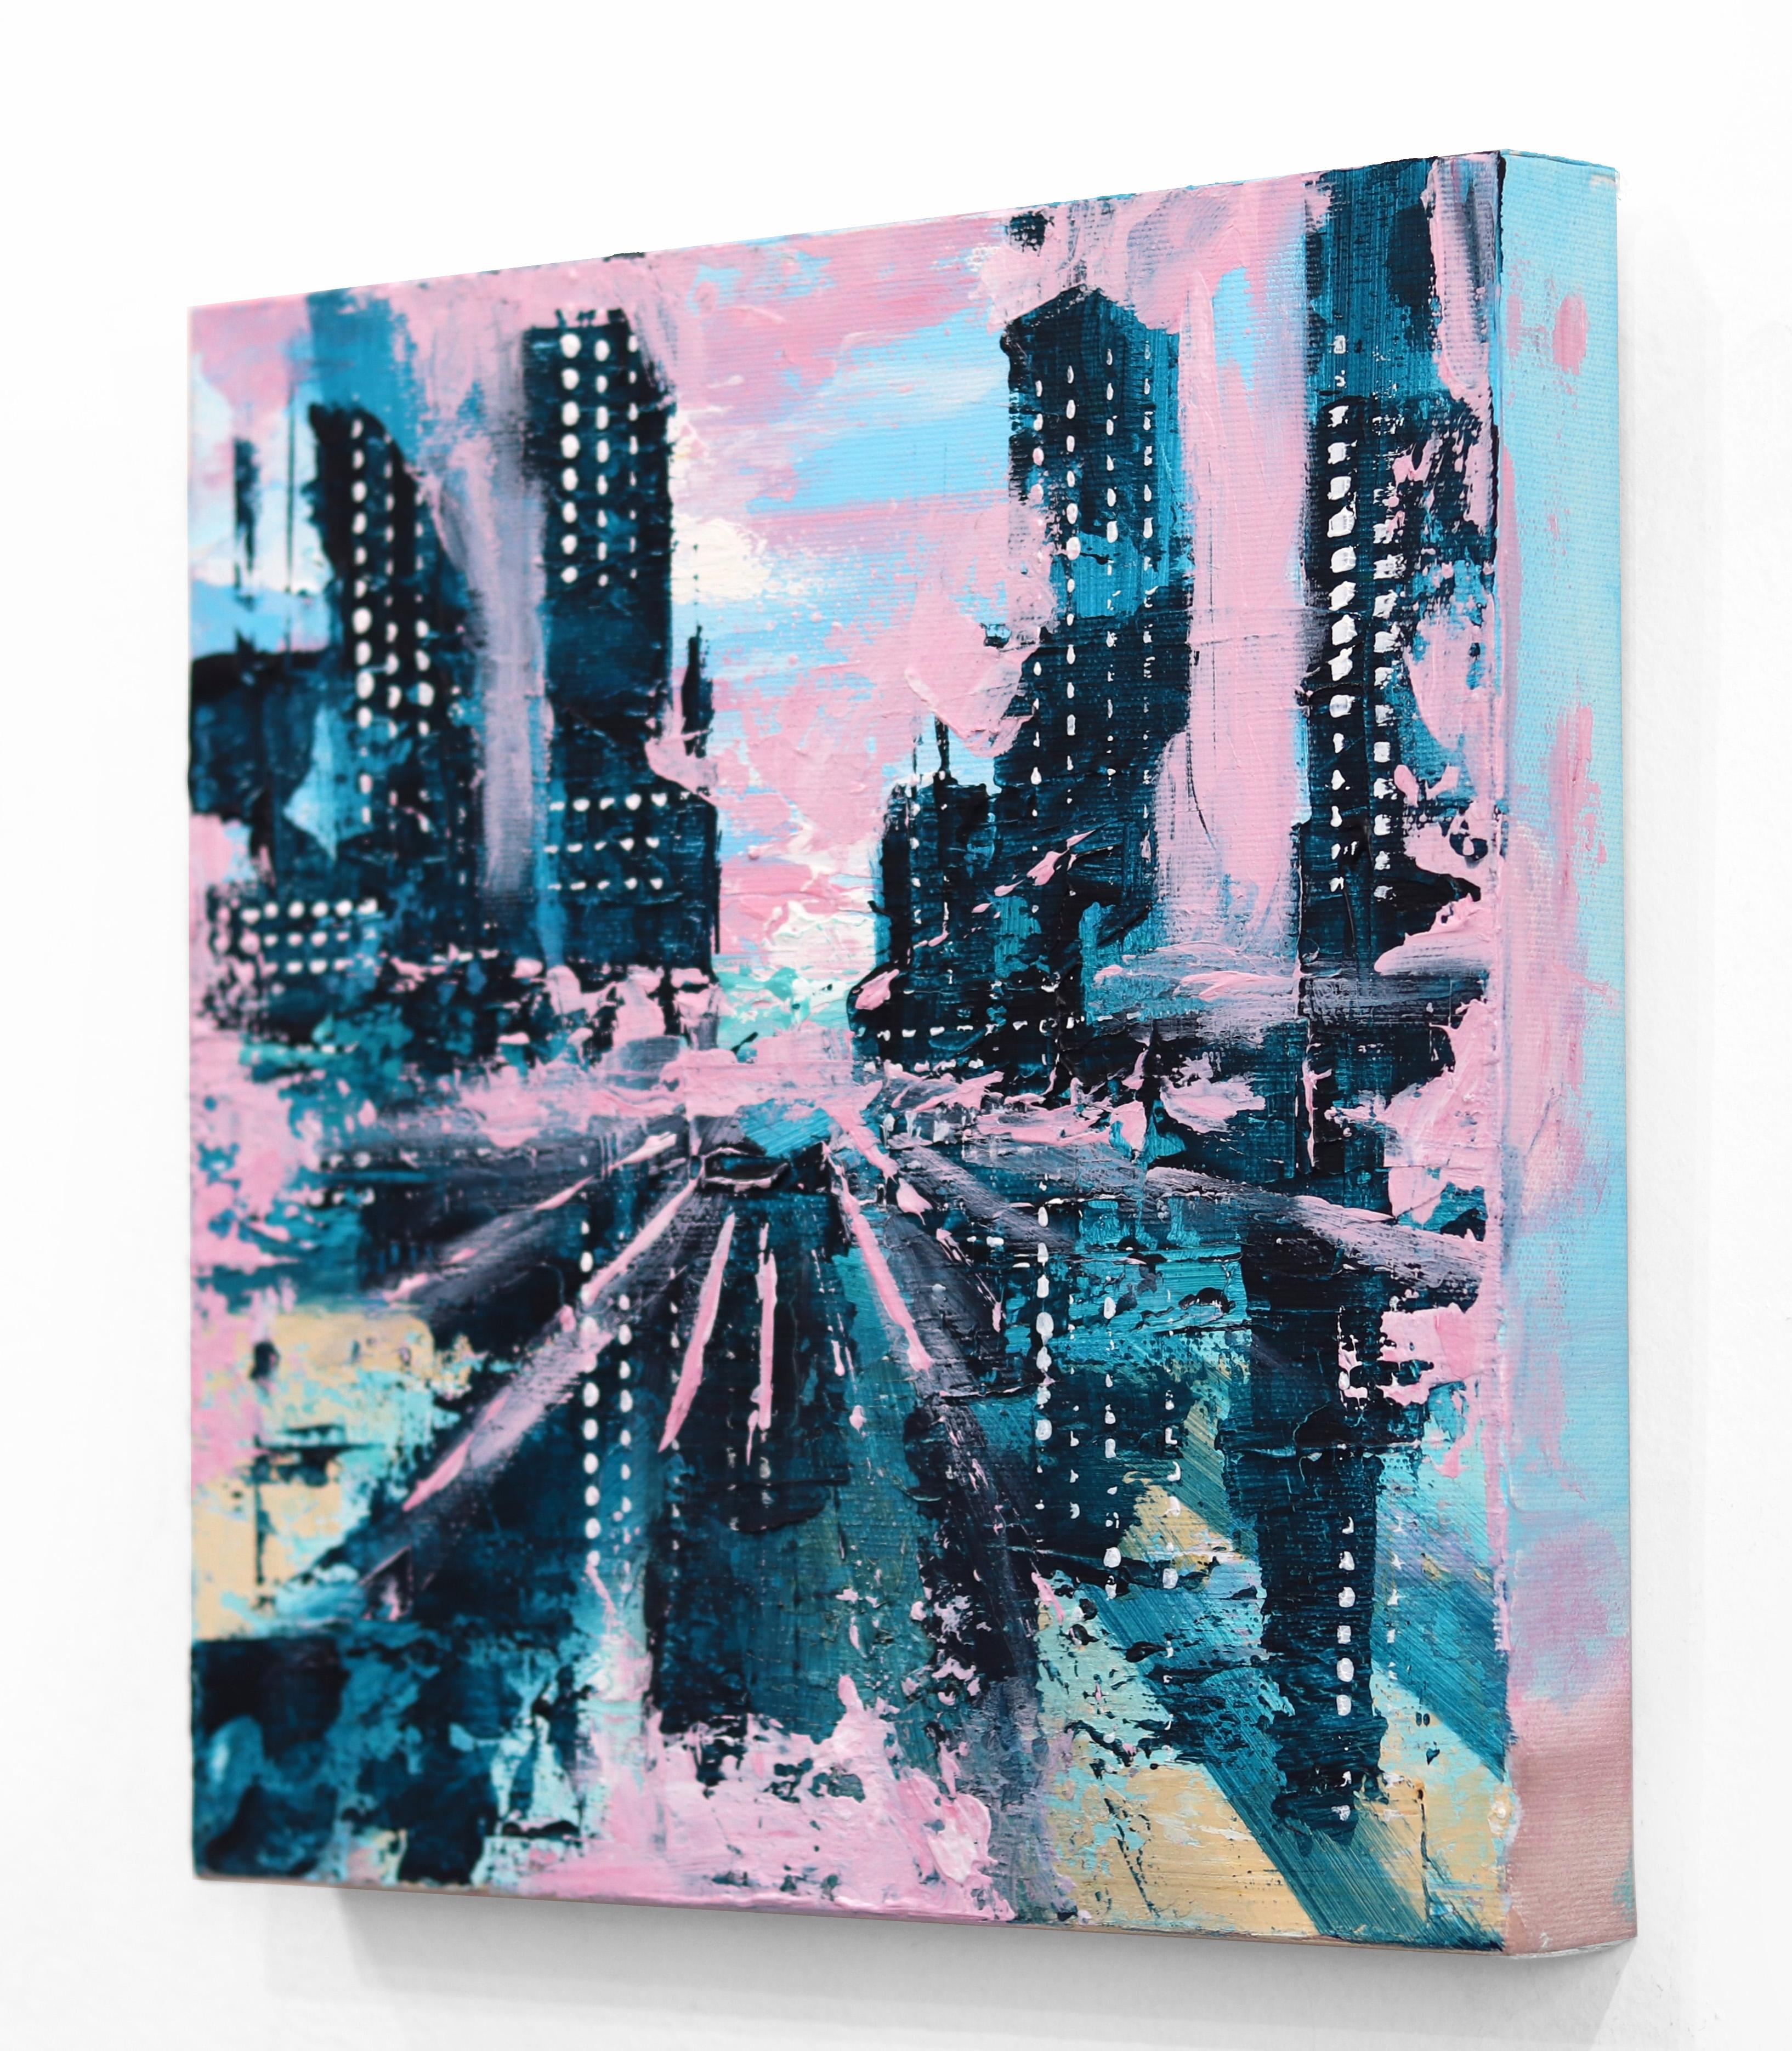 City Vibes - Pastel Pink Textured Cityscape - Post-Impressionist Painting by Ivana Milosevic